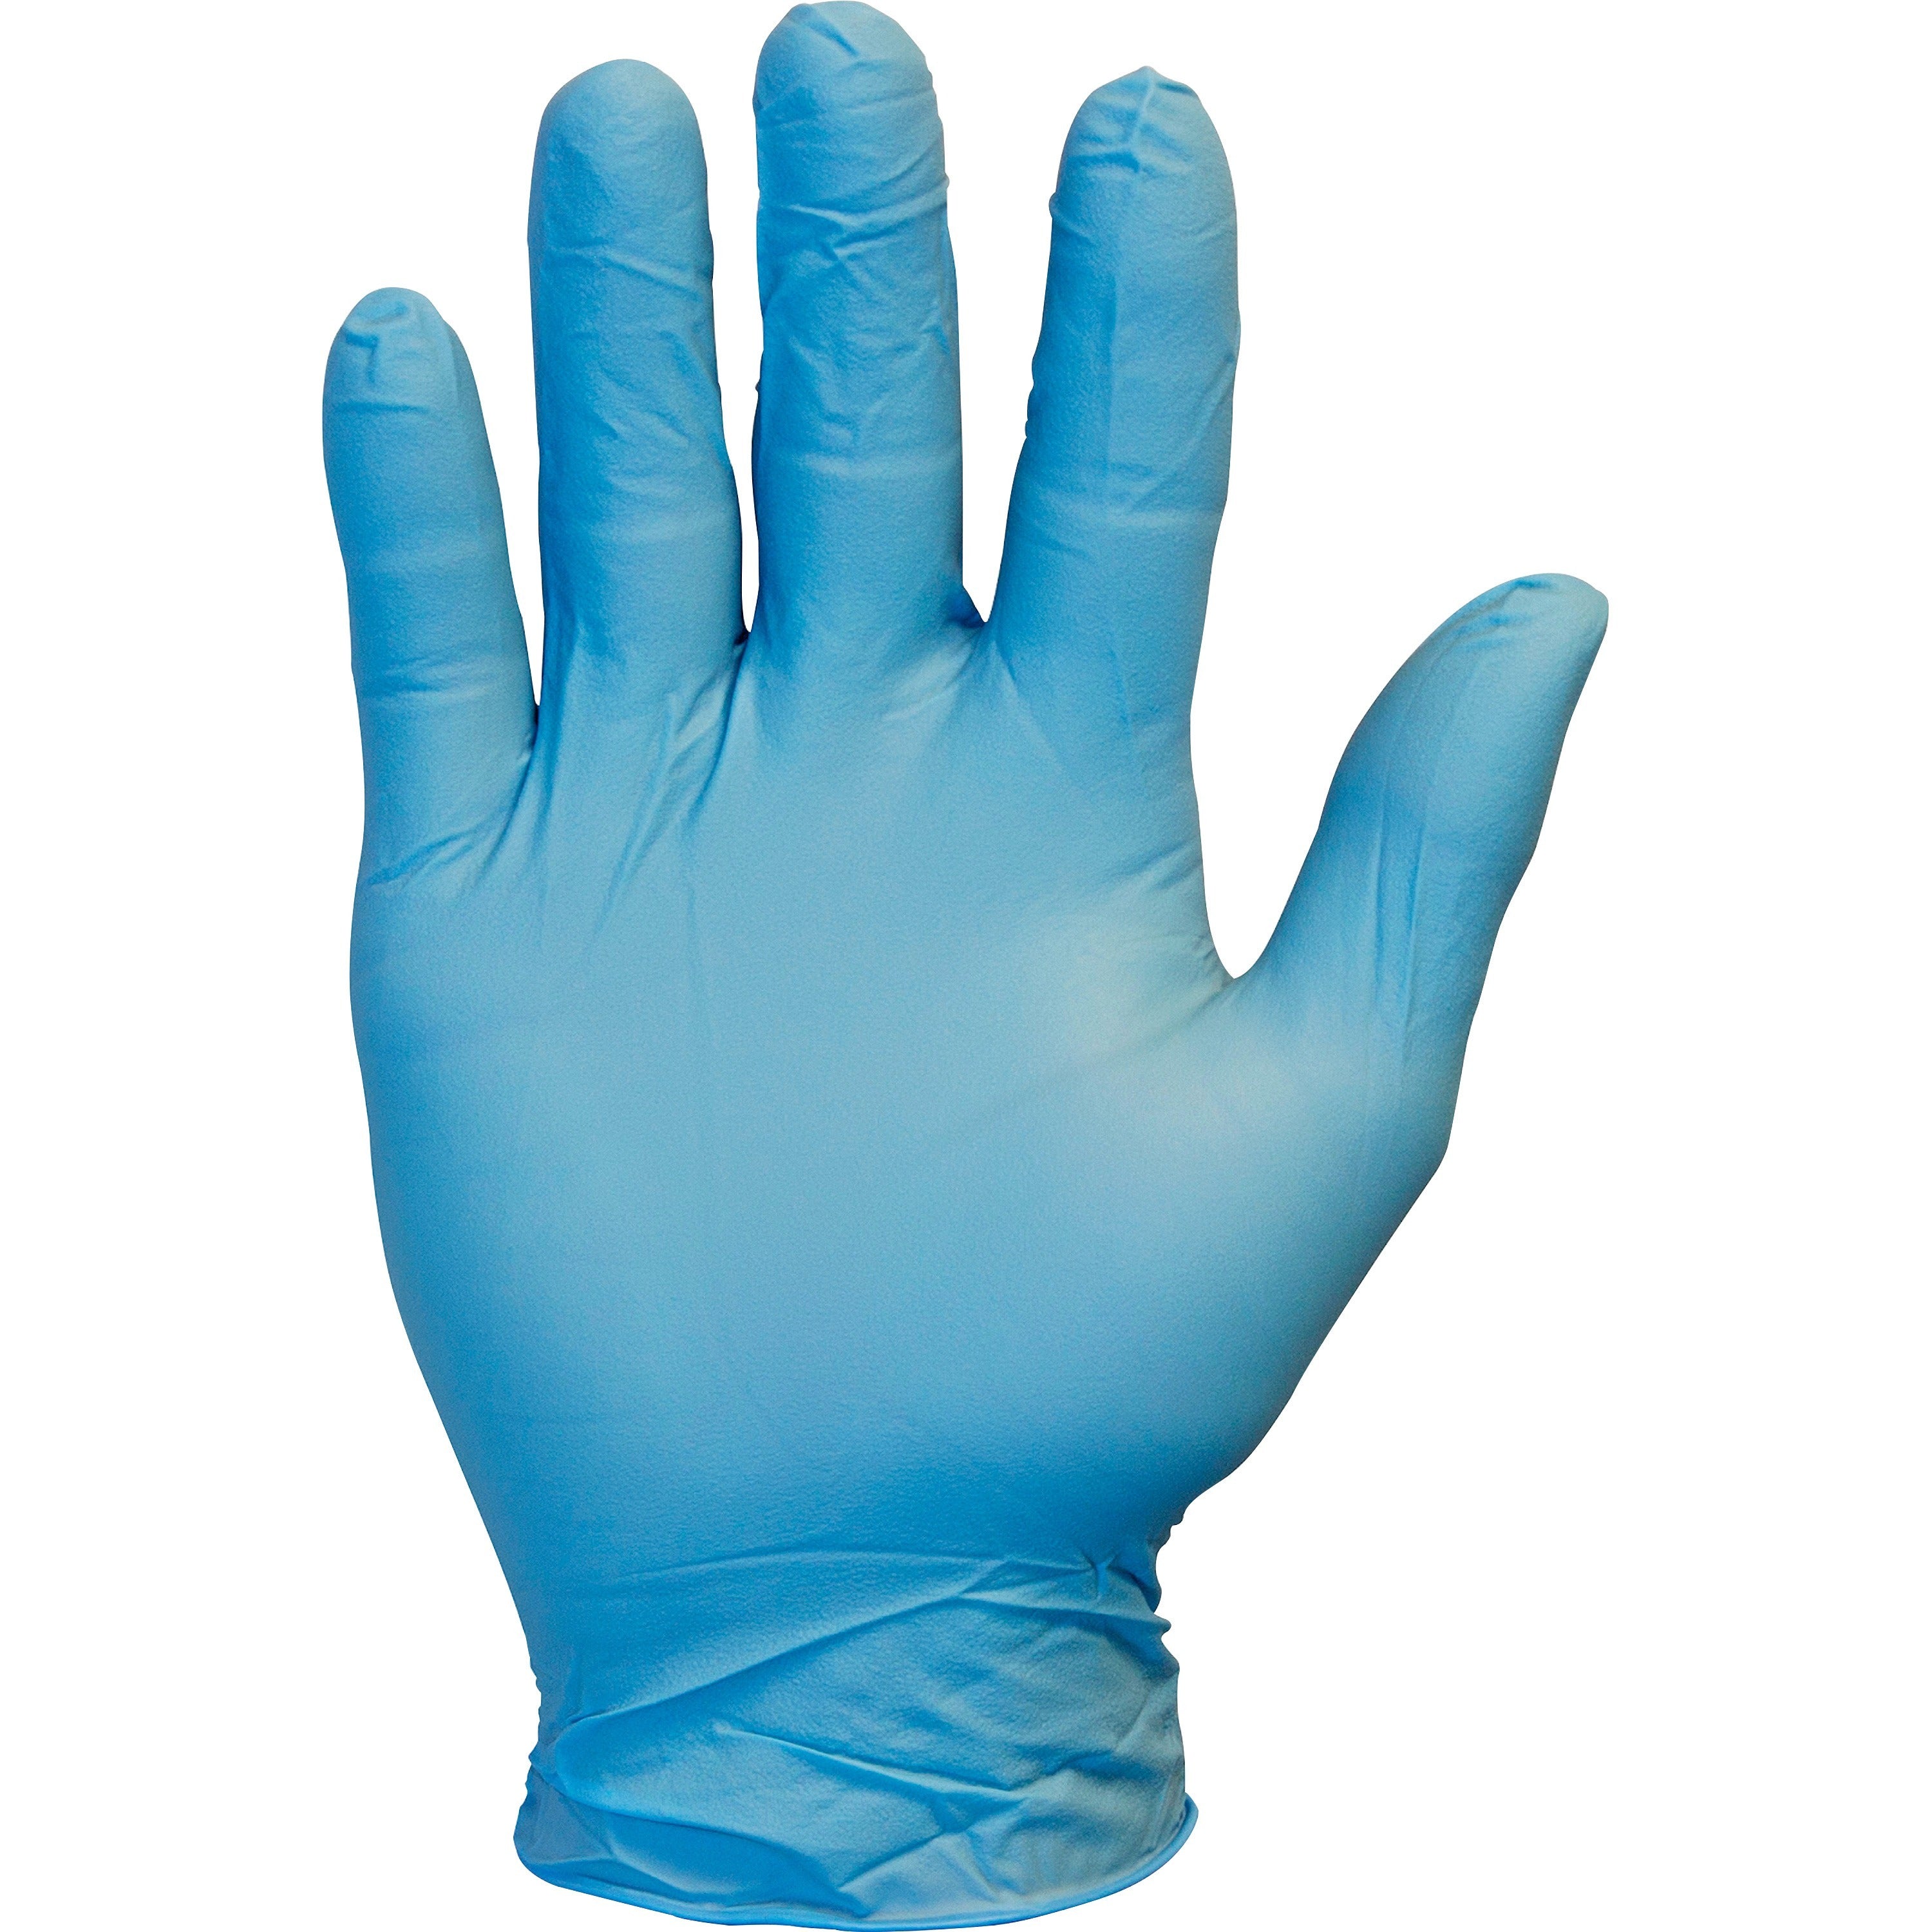 safety-zone-powder-free-blue-nitrile-gloves-small-size-blue-comfortable-allergen-free-silicone-free-latex-free-for-cleaning-dishwashing-food-janitorial-use-painting-pet-care-10-carton-965-glove-length_szngnprsm1mct - 1